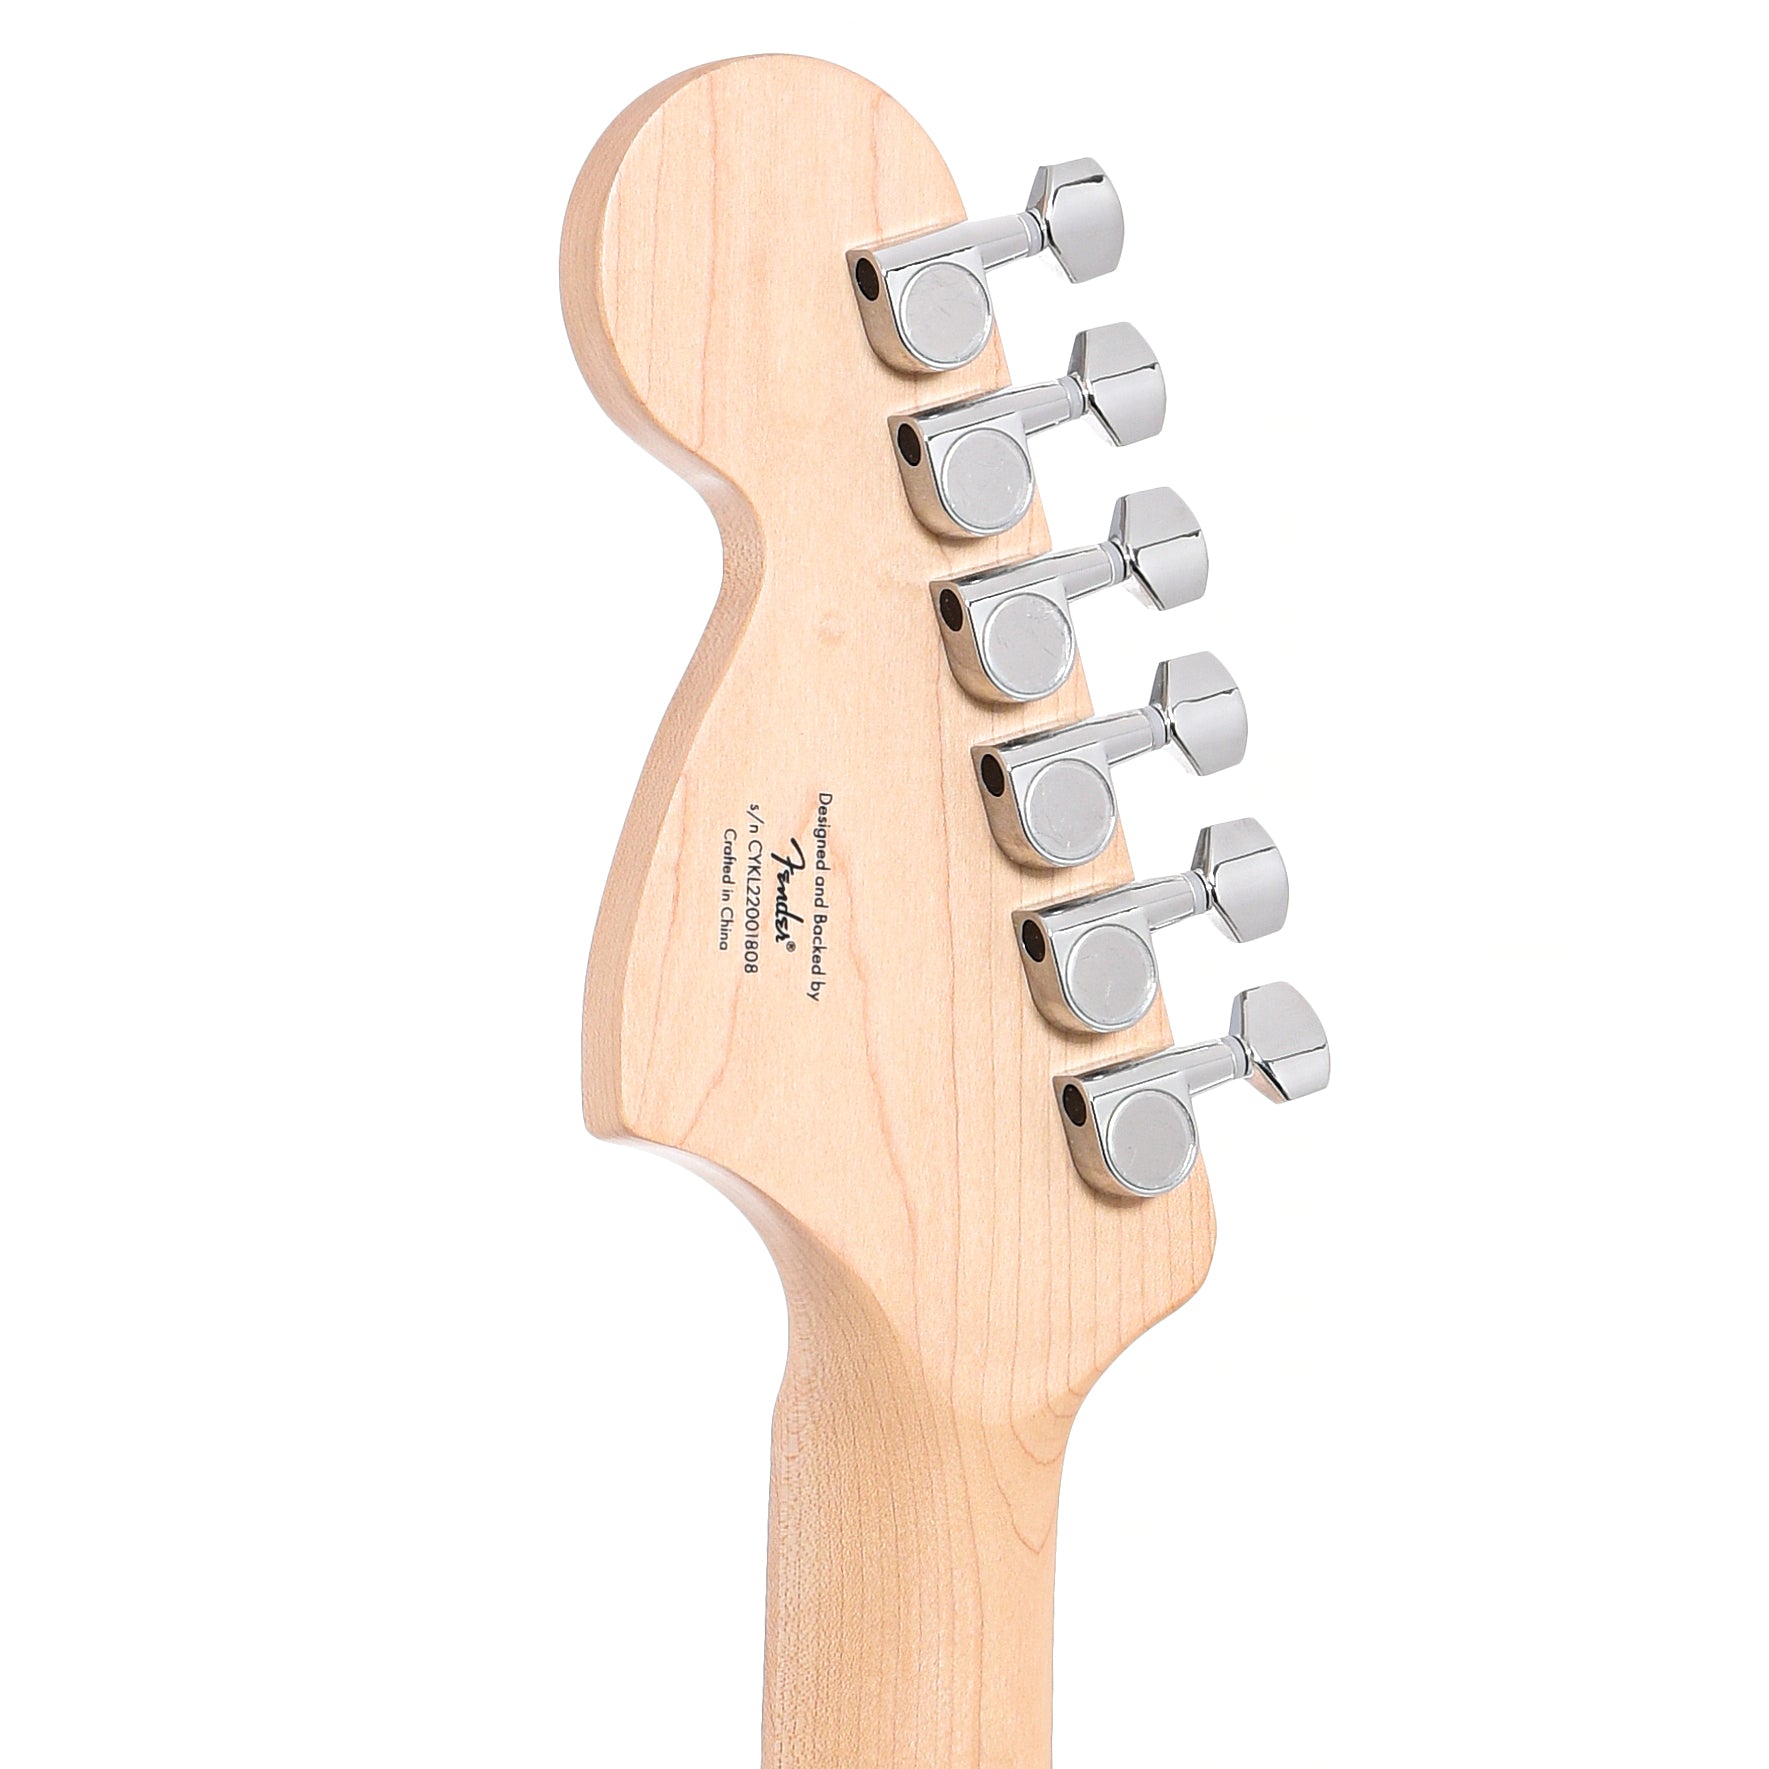 Back headstock of Squier Affinity Series Stratocaster, Lake Placid Blue